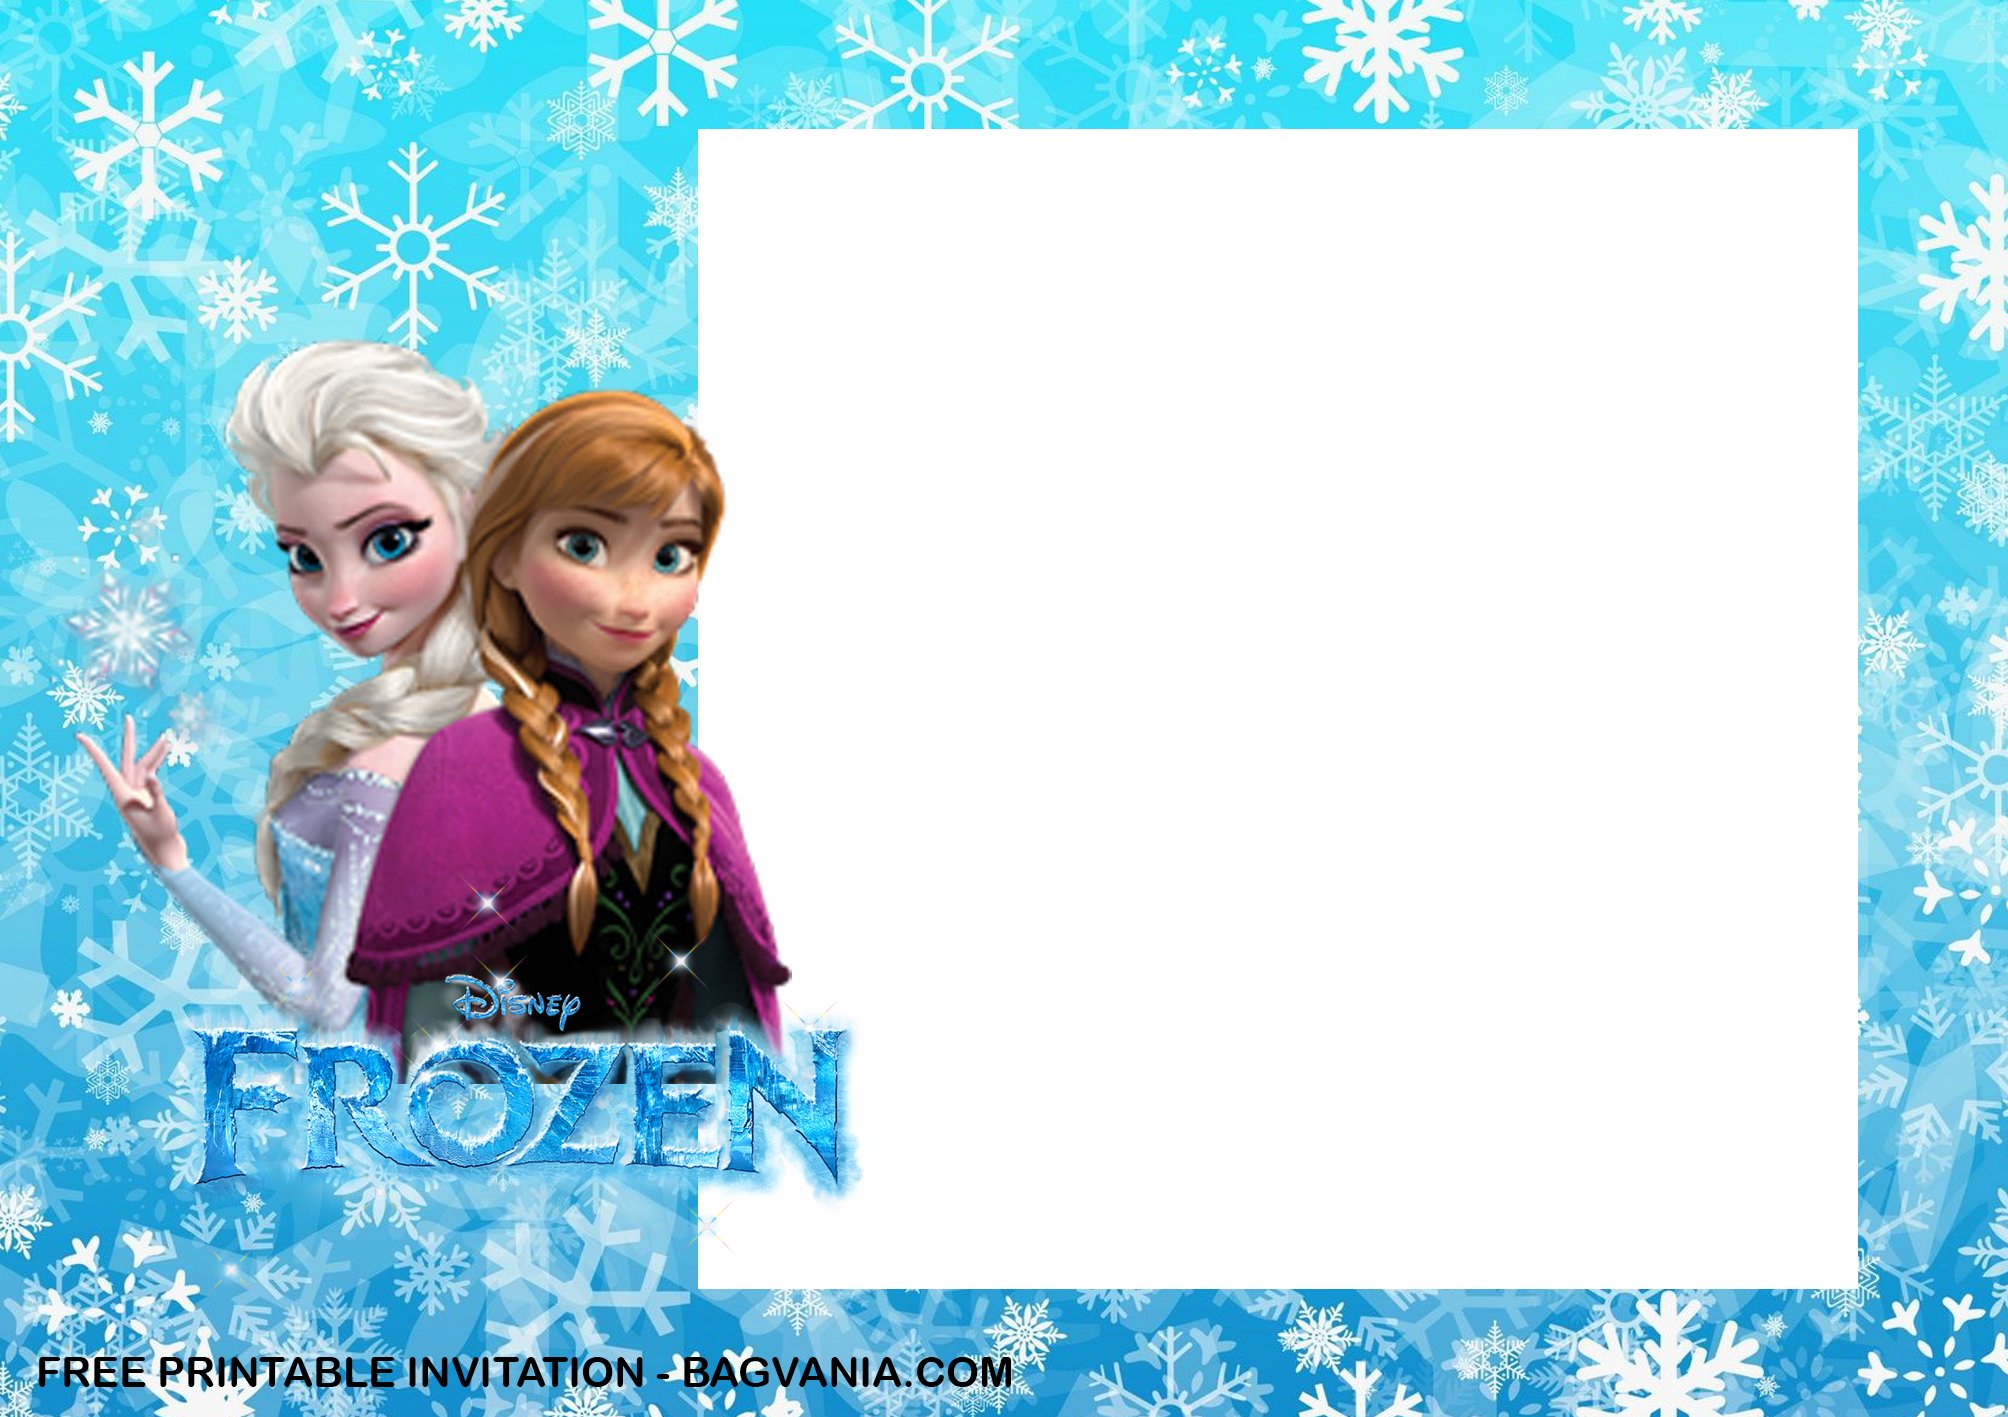 FREE Printable) – Anna and Elsa Frozen Birthday Invitation For Frozen Birthday Card Template